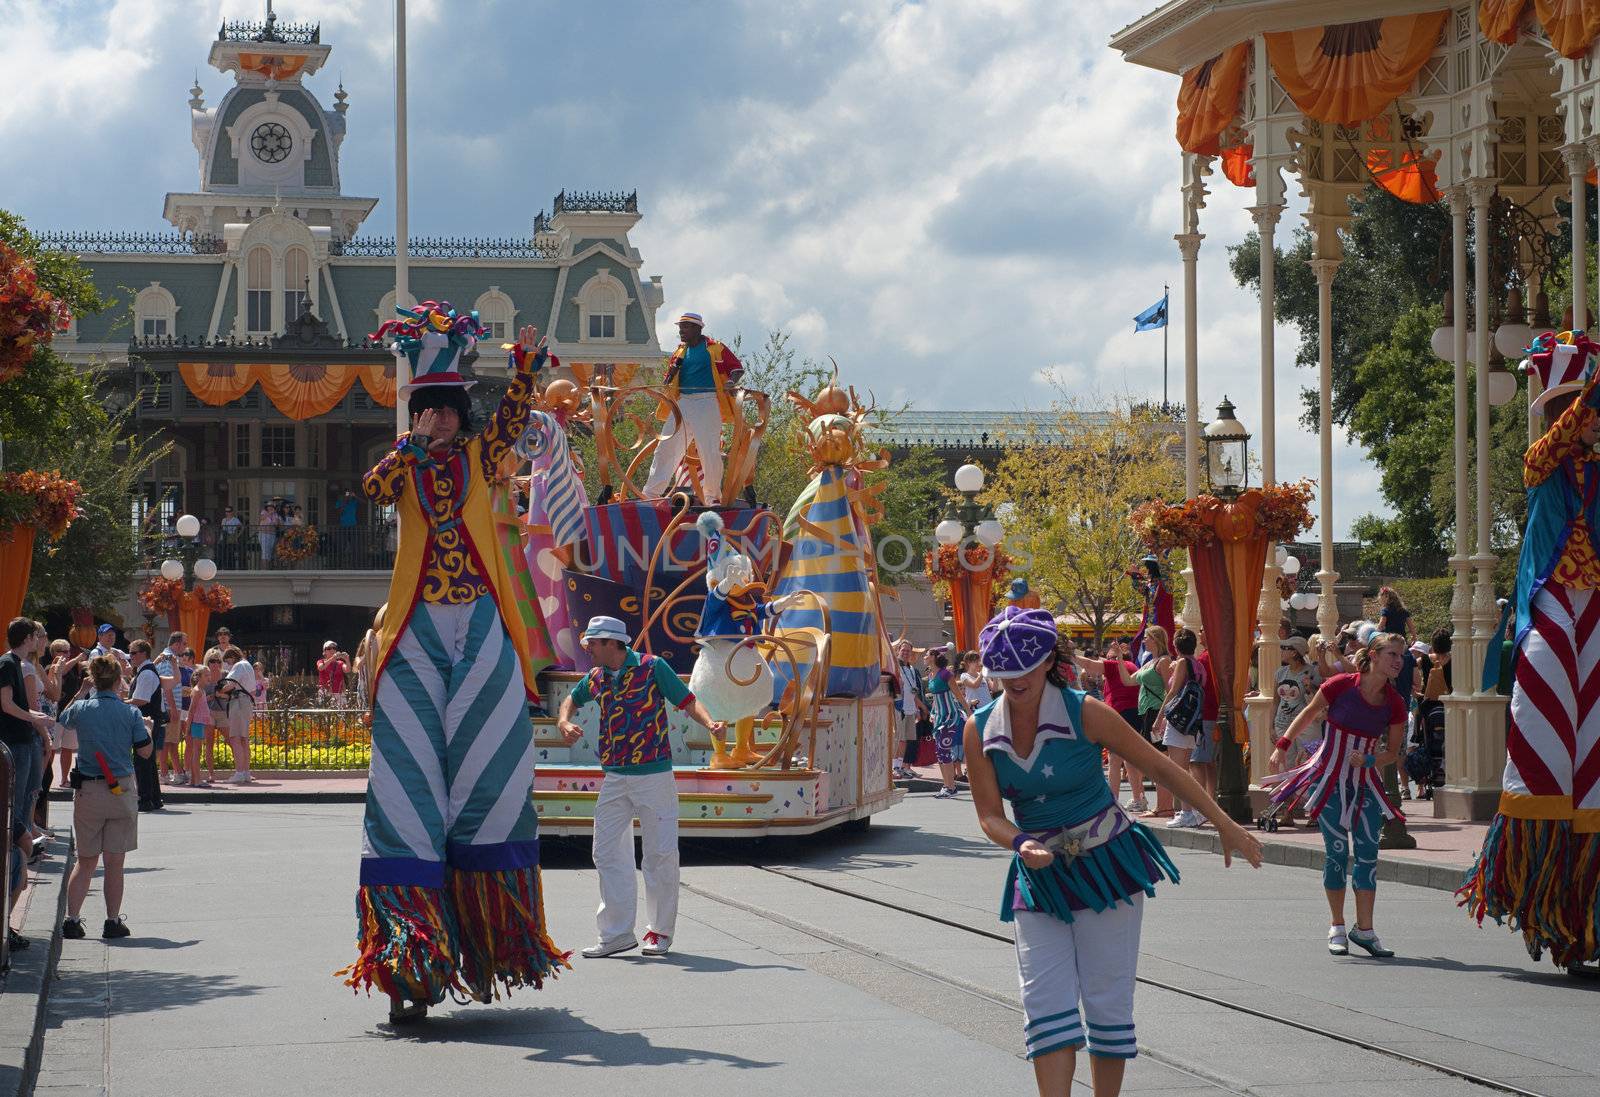 The midday parade at Disney's Magic Kingdom in Florida, October 4th 2010. Approximately 46 million people visit the Walt Disney World Resort annually.